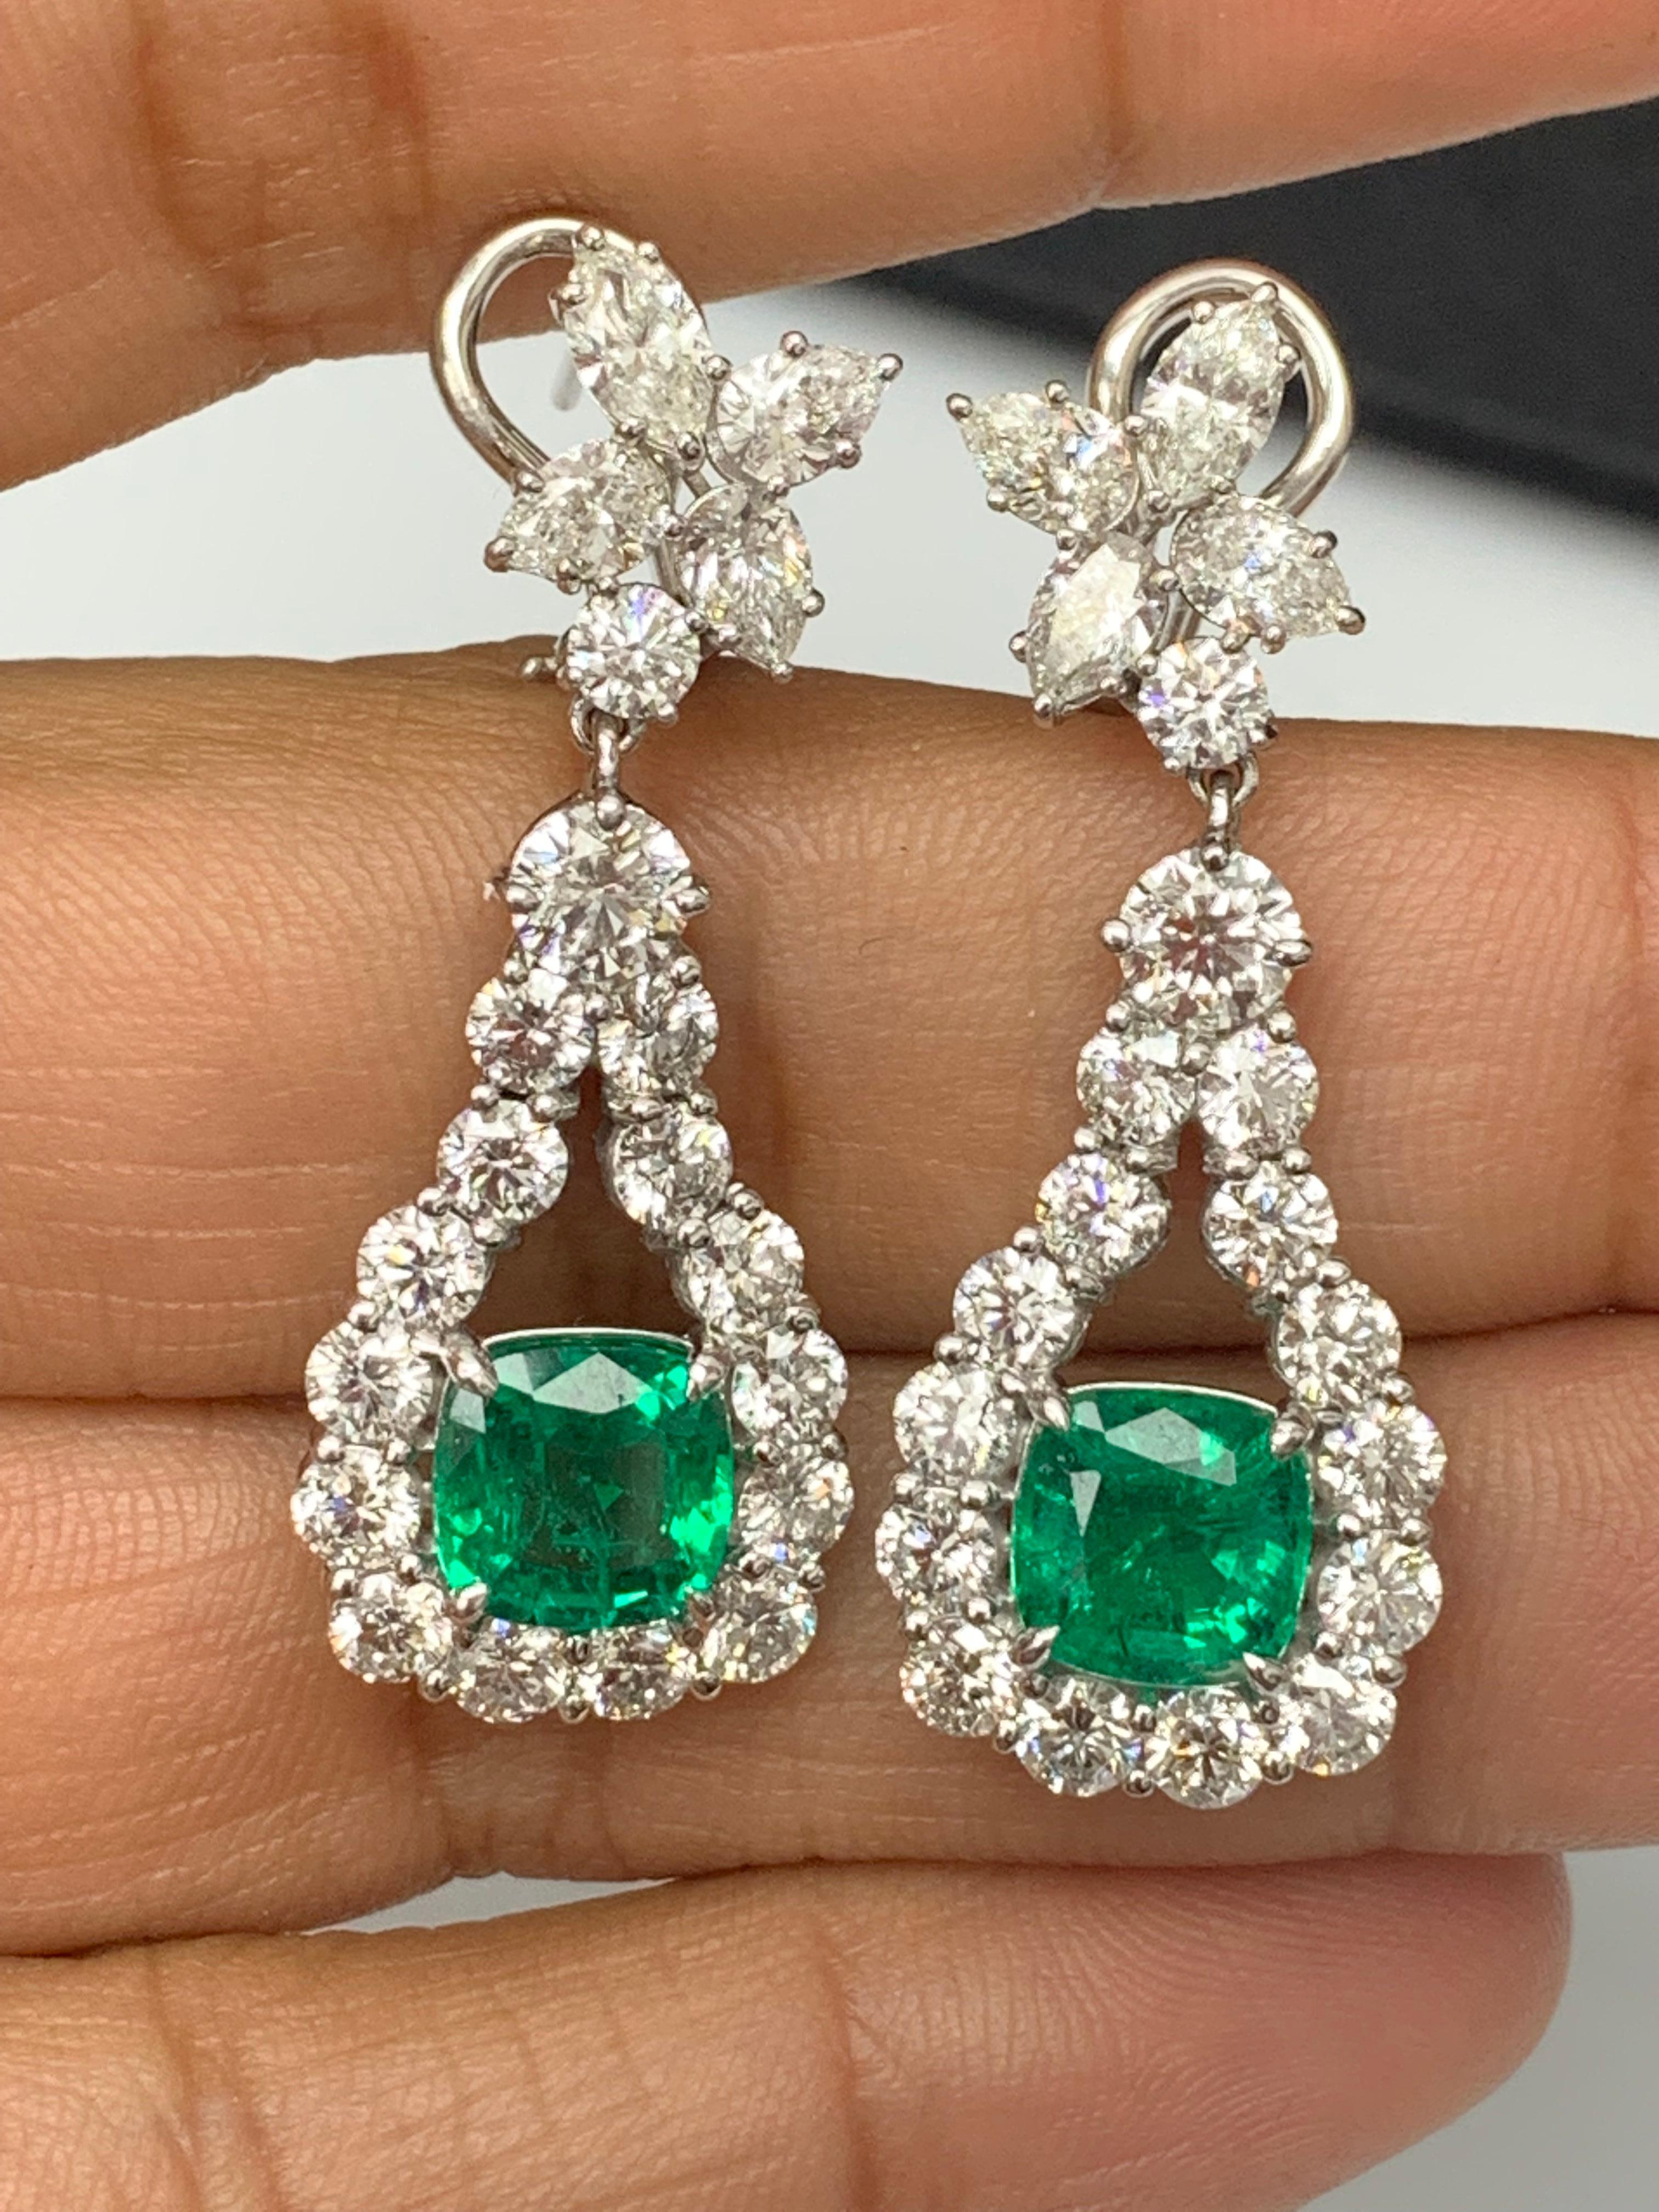 A beautiful and chic pair of drop earrings showcasing a cluster of brilliant mixed-cut diamonds, and cushion-cut emeralds set in an intricate and stylish design. 8 Mixed cut Diamonds weigh 1.62 carats in total. 2 vivid green emeralds weigh 3.49